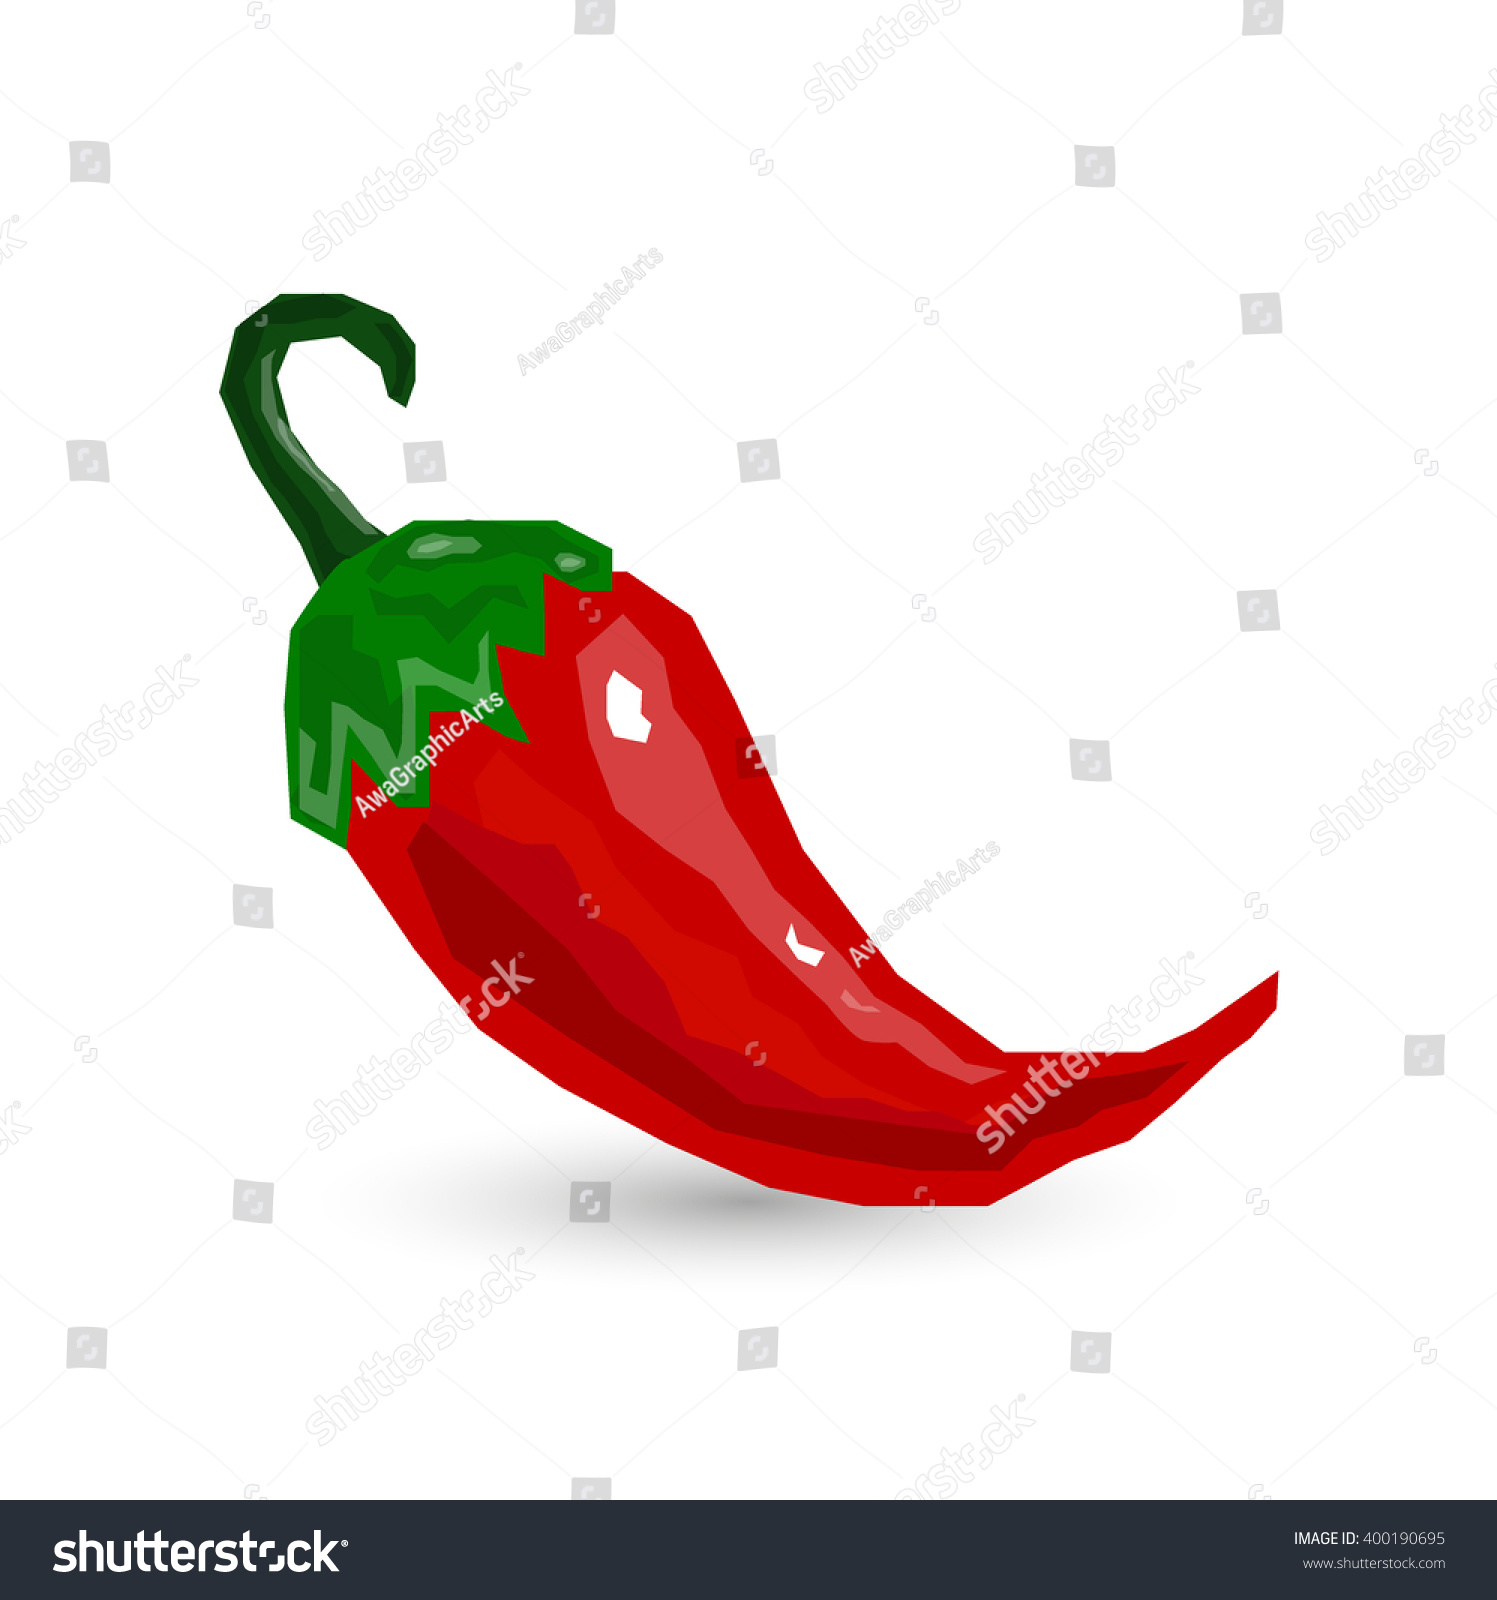 Red Chilli Pepper Isolated On White Stock Vector 400190695 ...